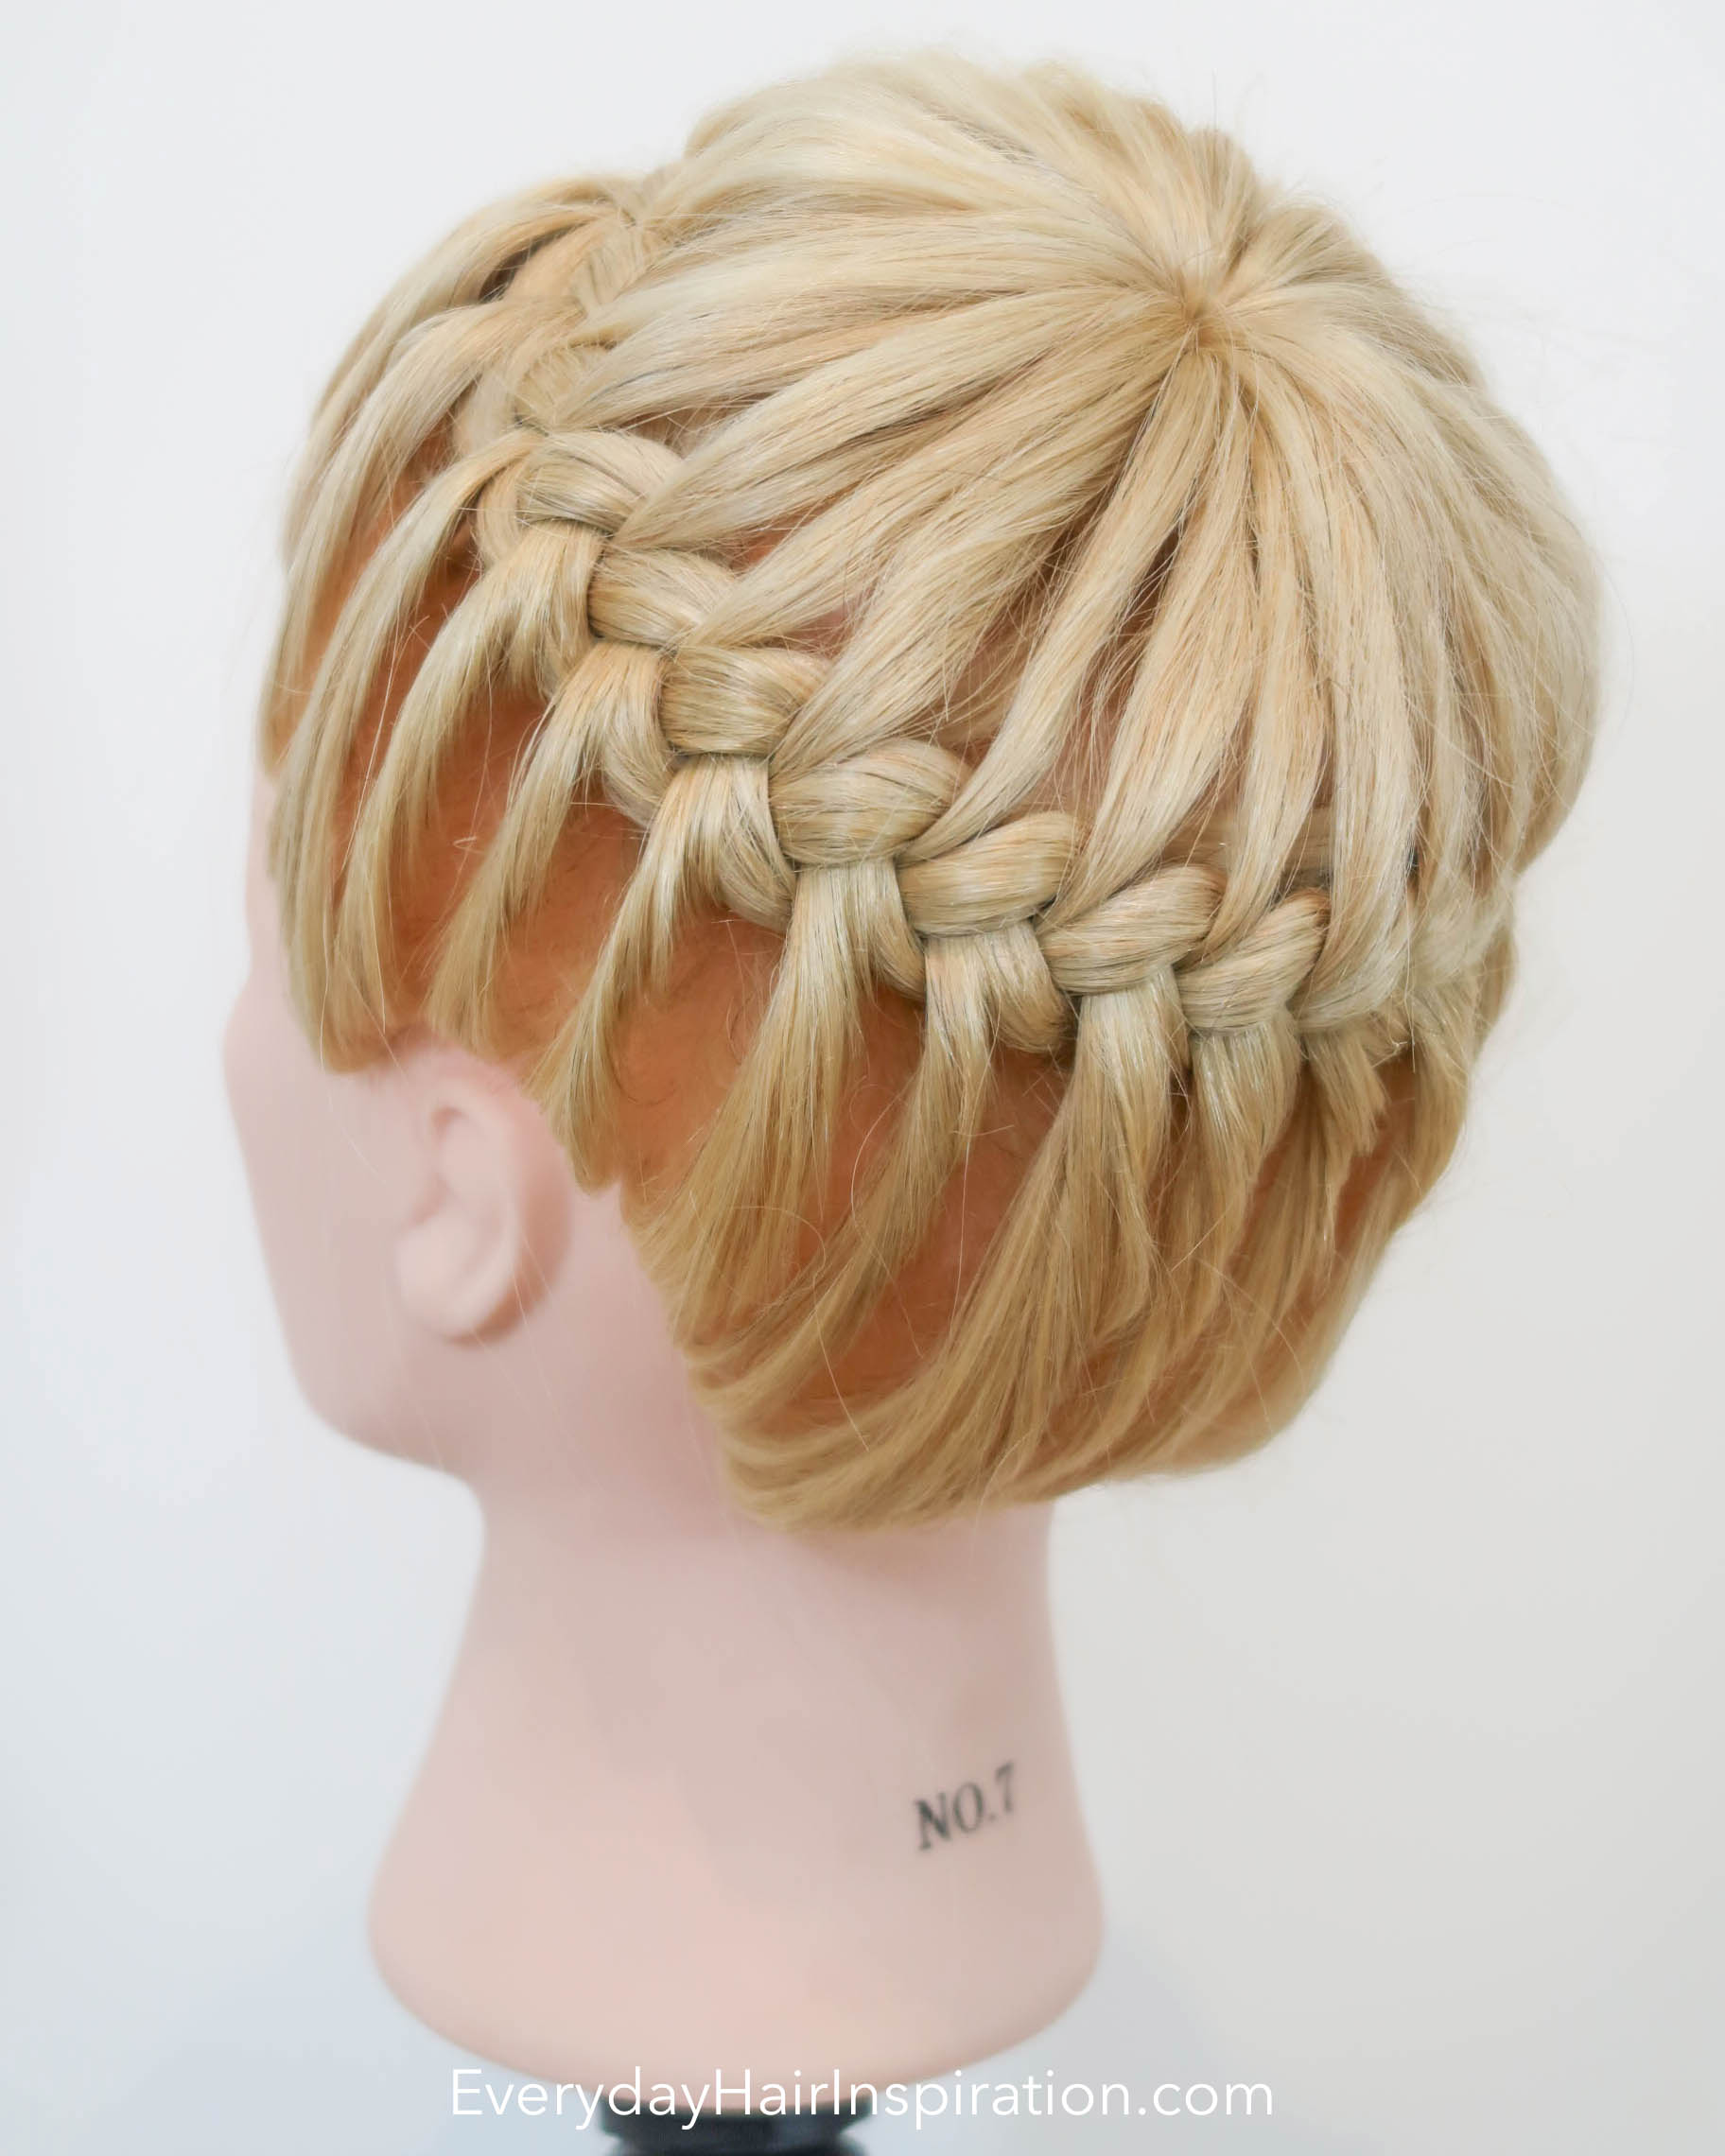 Braided Headband Updo · How To Style A Crown Braid · Beauty on Cut Out +  Keep